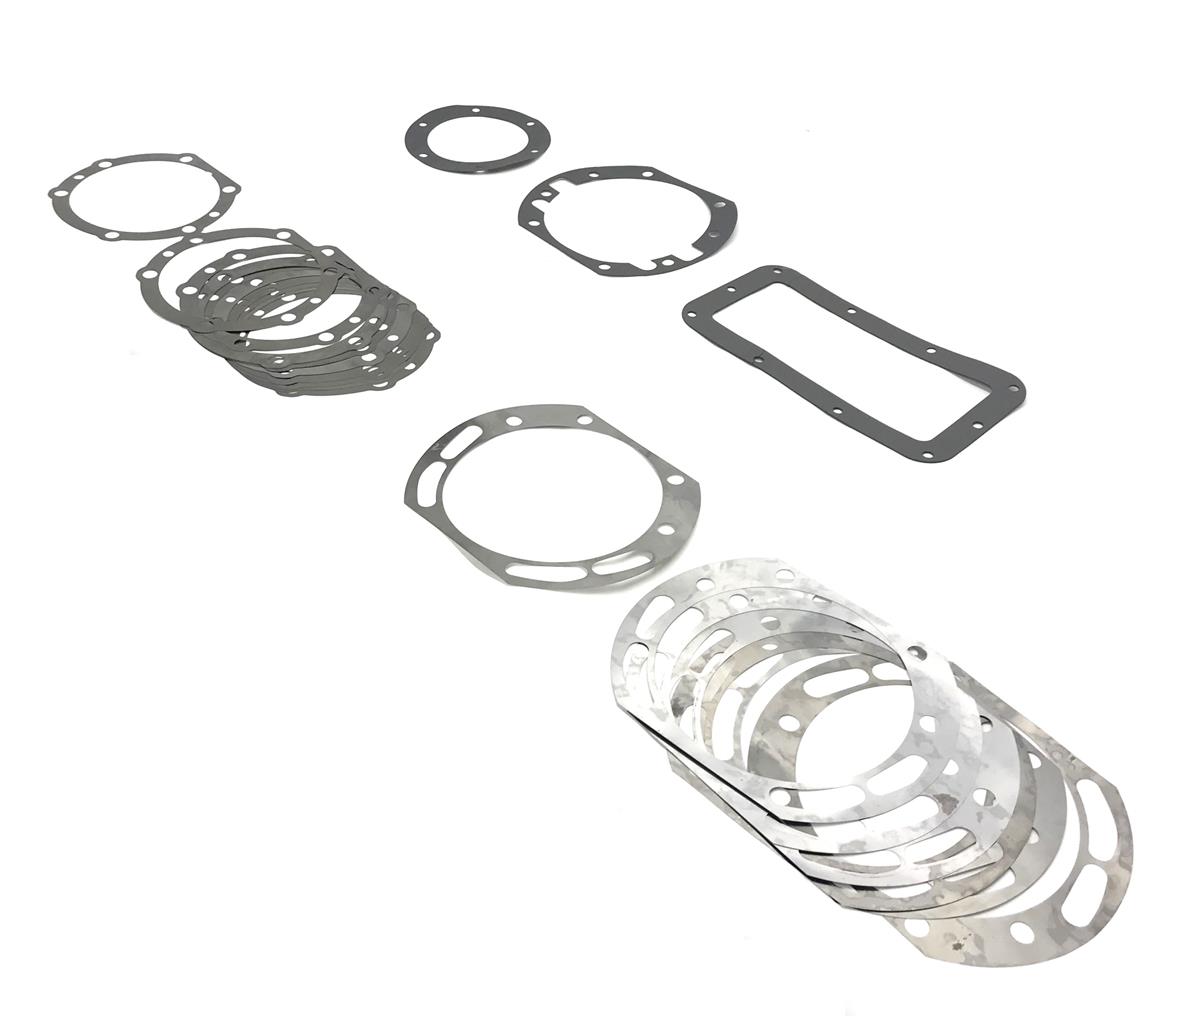 5T-801 | 5T-801  5-Ton Truck Rockwell Toploader Differential Gasket and Shim Set (5).jpg